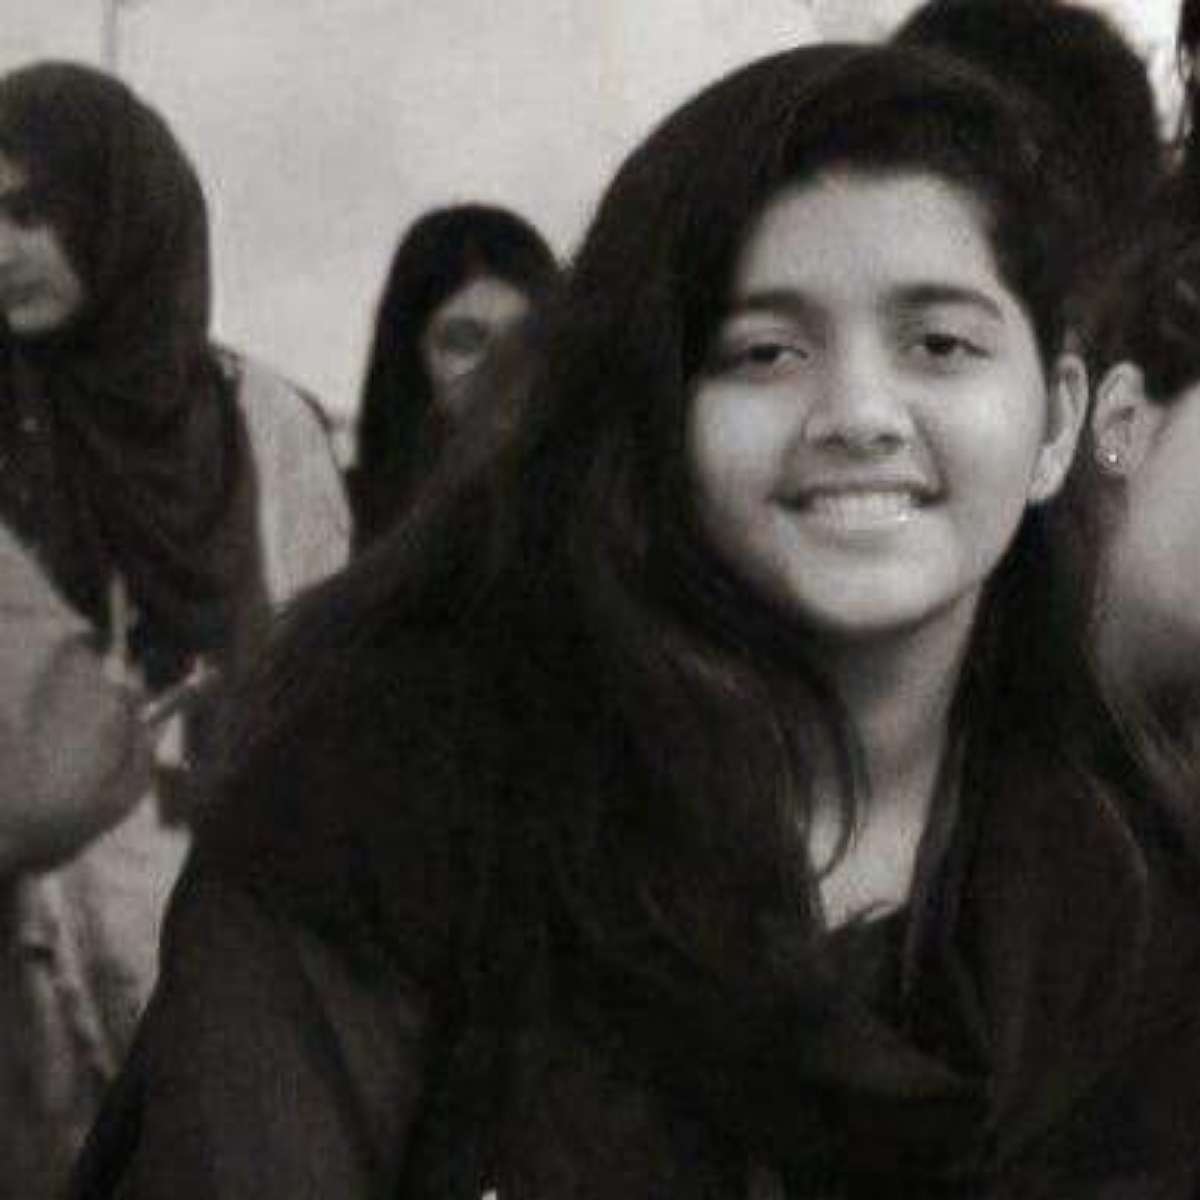 PHOTO: An undated handout photo made available by the Sheikh family shows Sabika Sheikh, an exchange student from Pakistan who was killed in the shooting at Santa Fe High school.